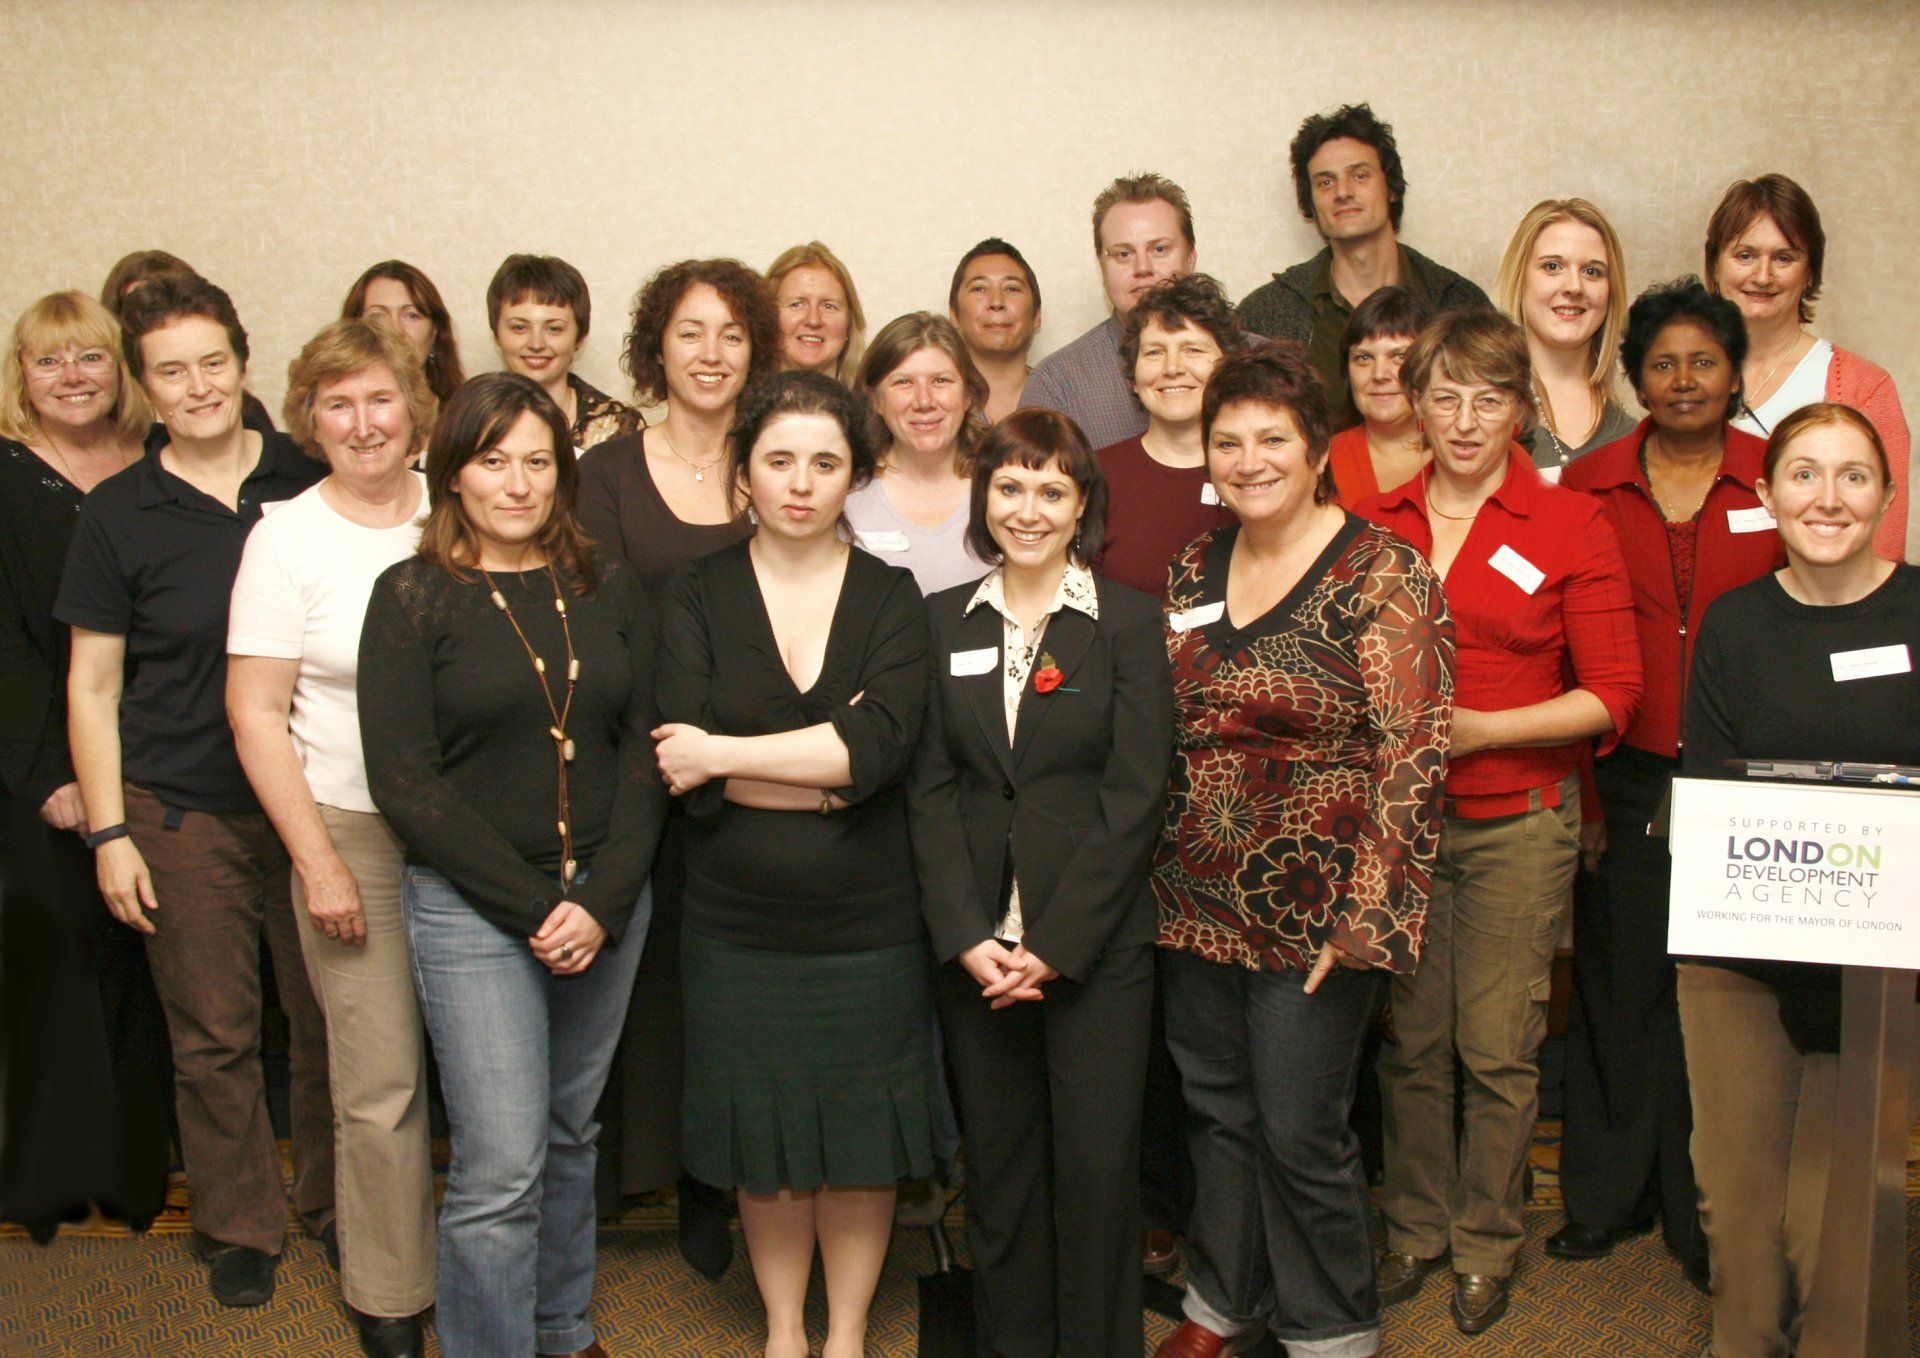 Group shot of smiling attendees at AGM.